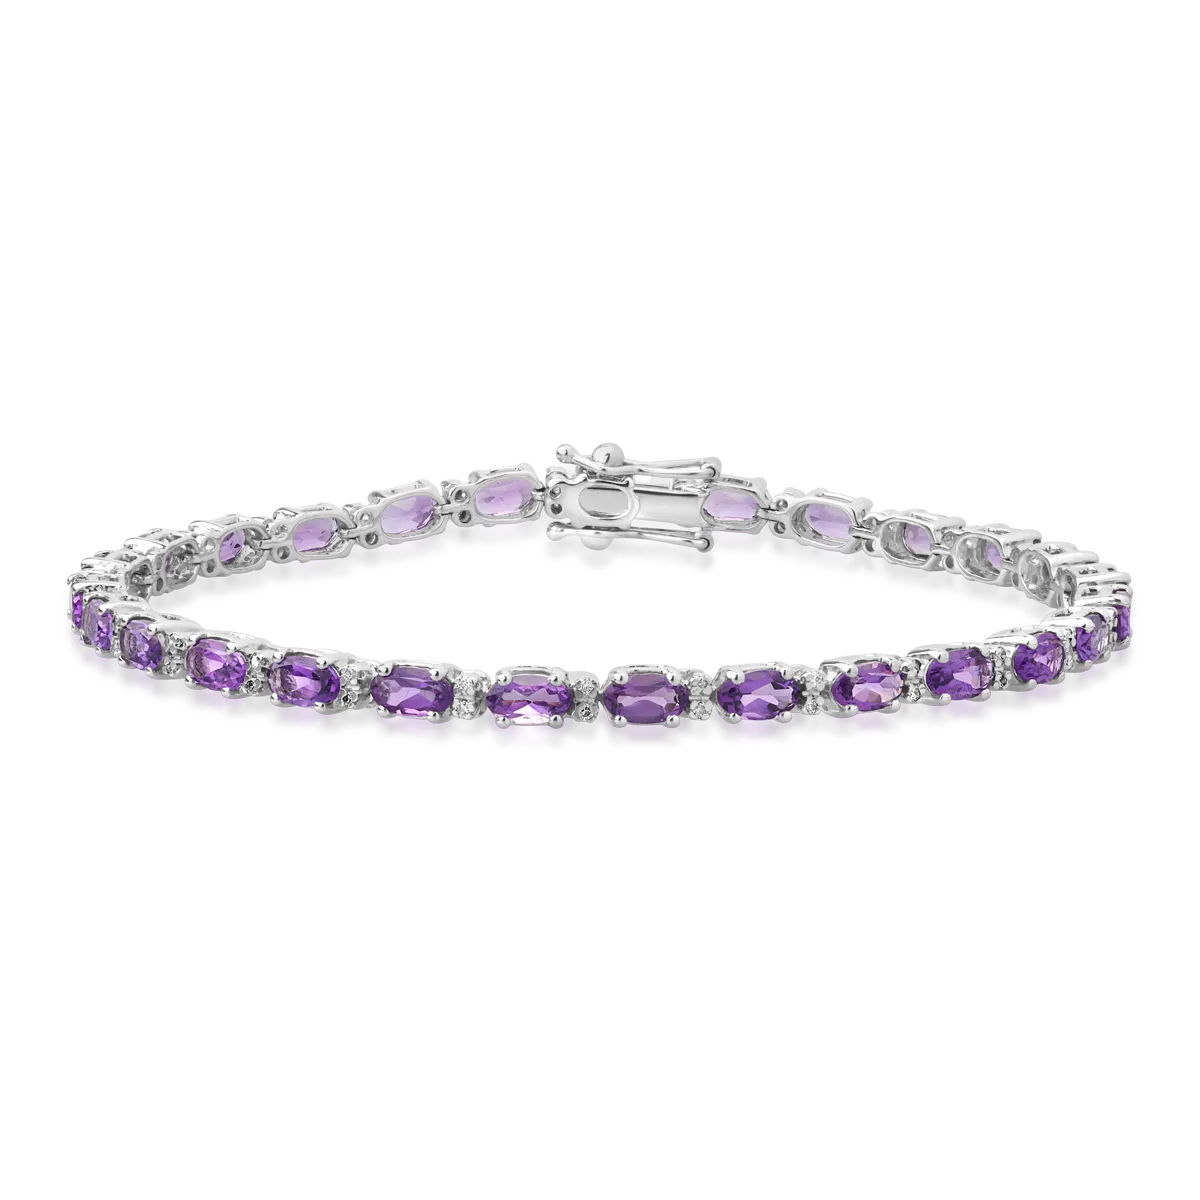 18K white gold tennis bracelet with 5.26ct amethyst and 0.27ct diamonds